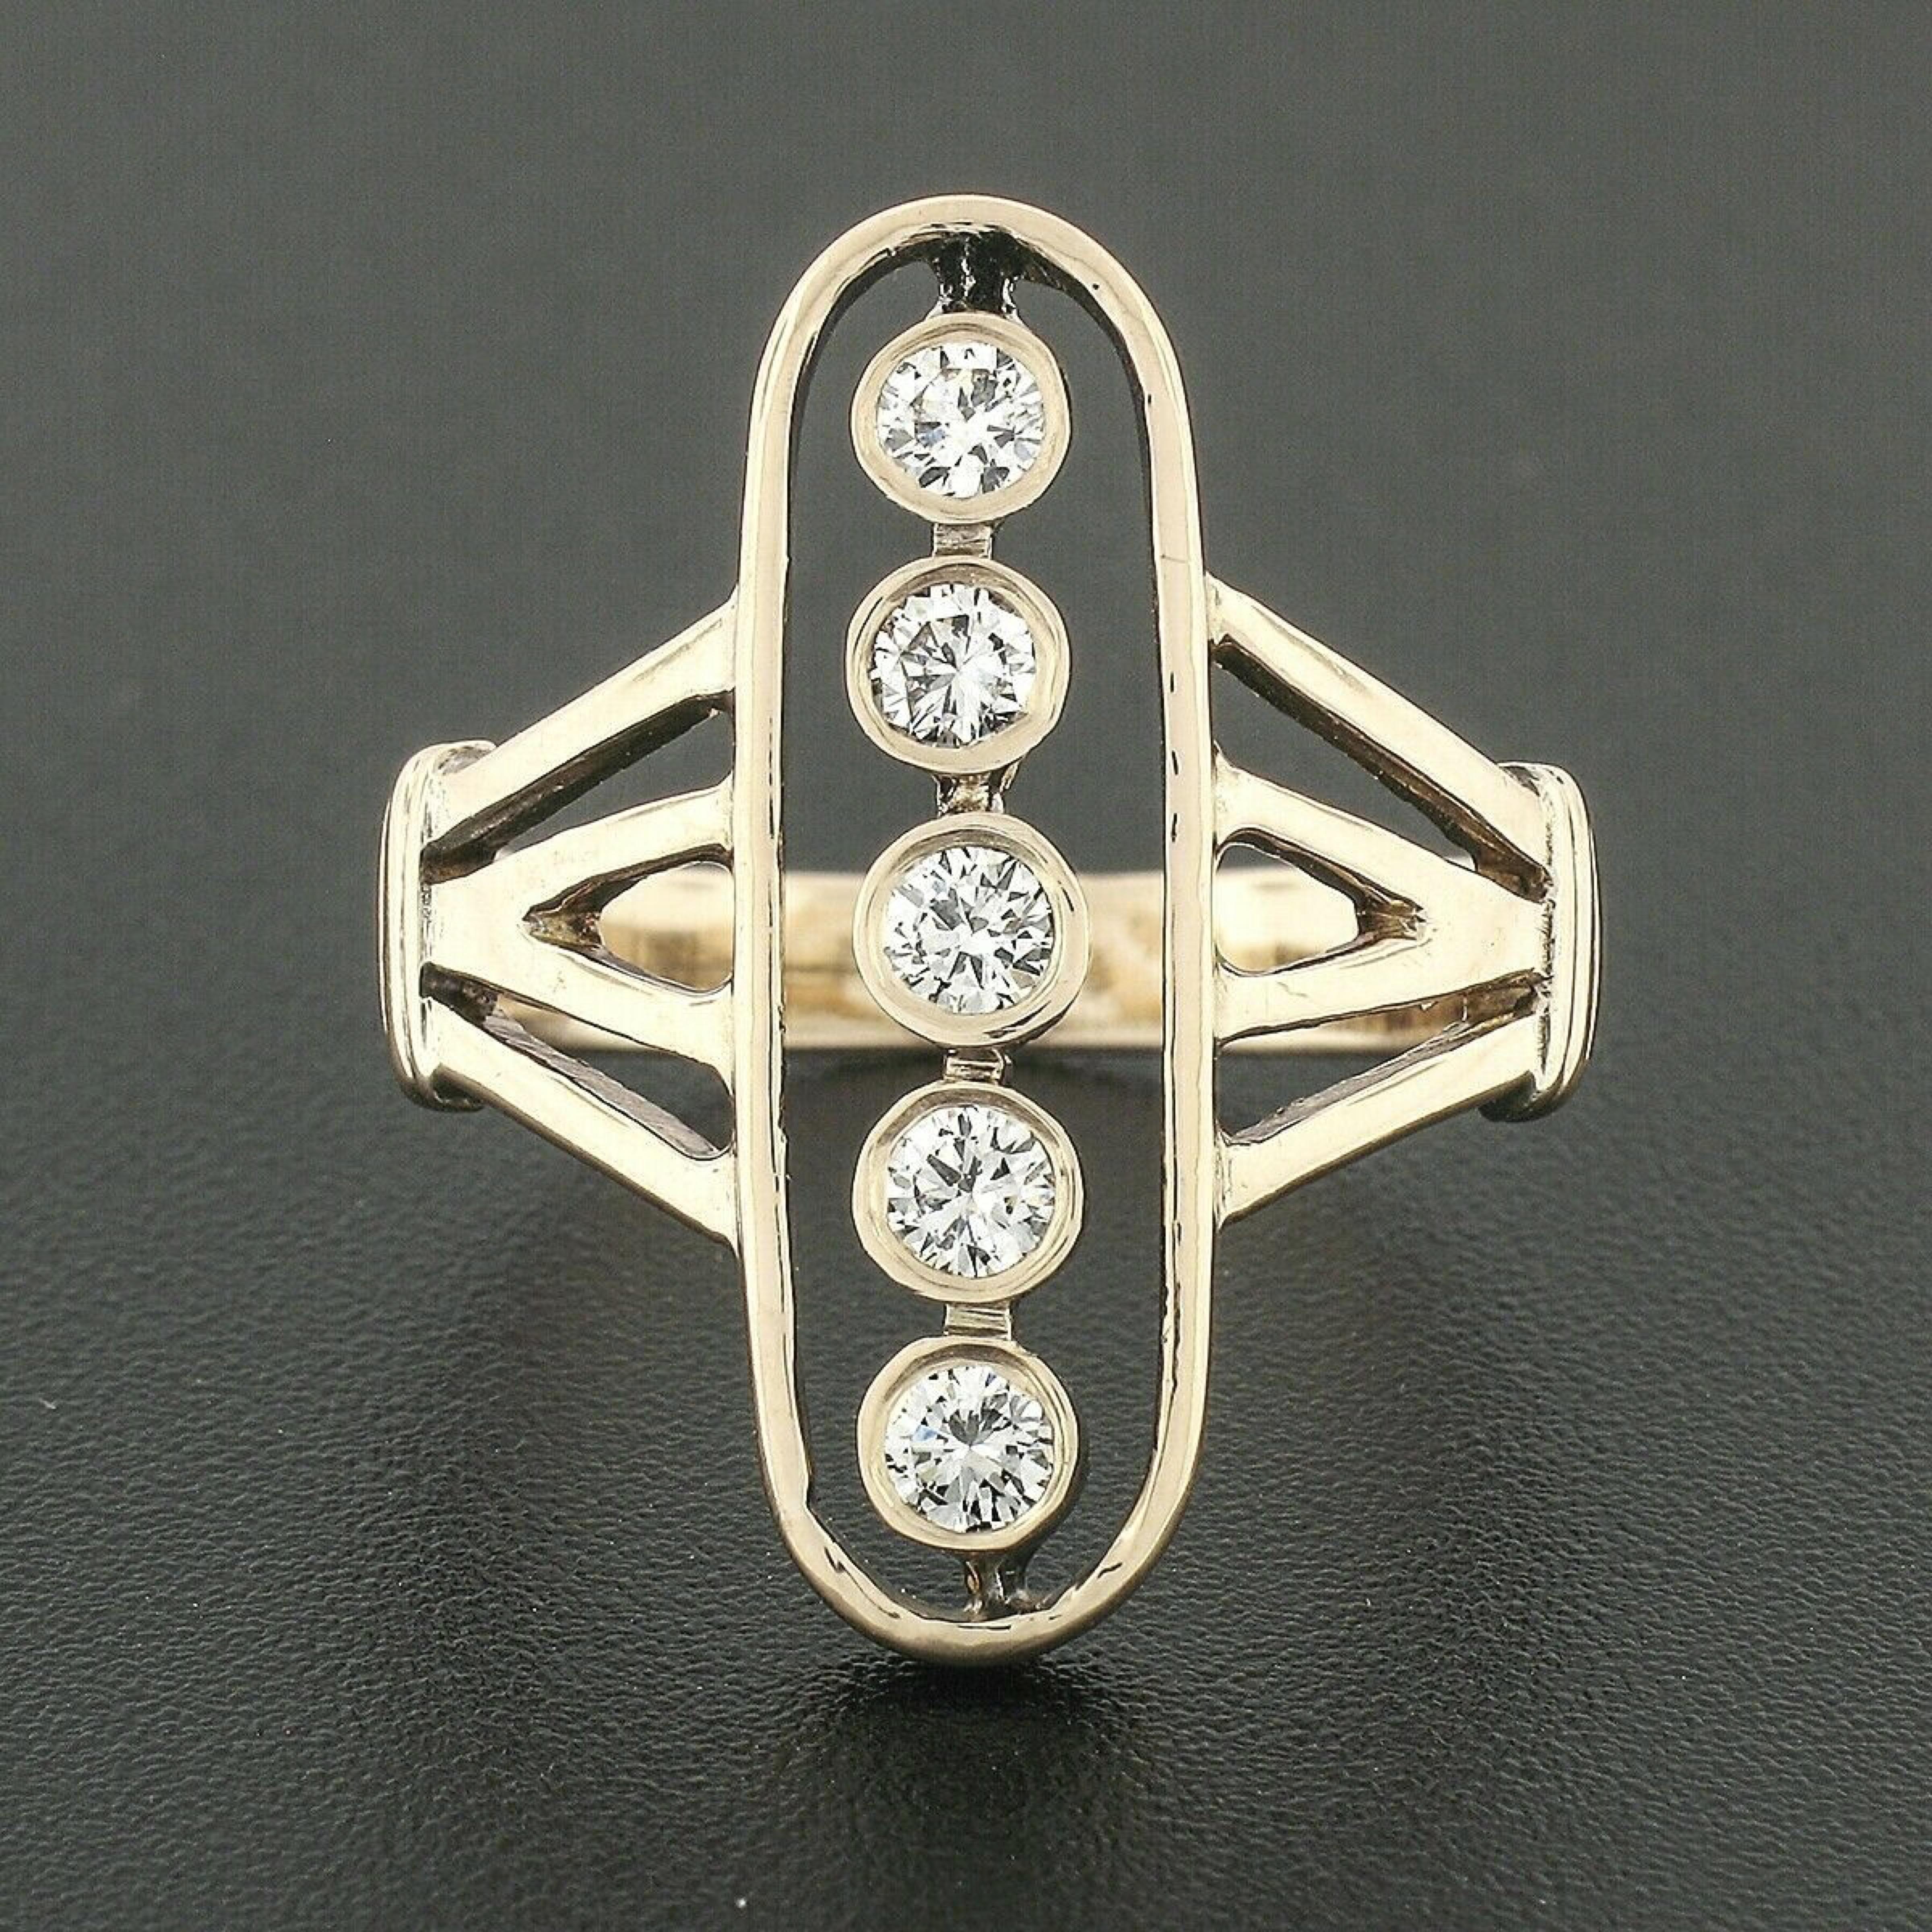 This unique elongated oval diamond ring is crafted in solid 14k rosy yellow gold. This beautiful vintage ring from the 1940's features five old traditional cut diamonds that are bezel set and have a near colorless F/G color with VS1/VS2 clarity. The